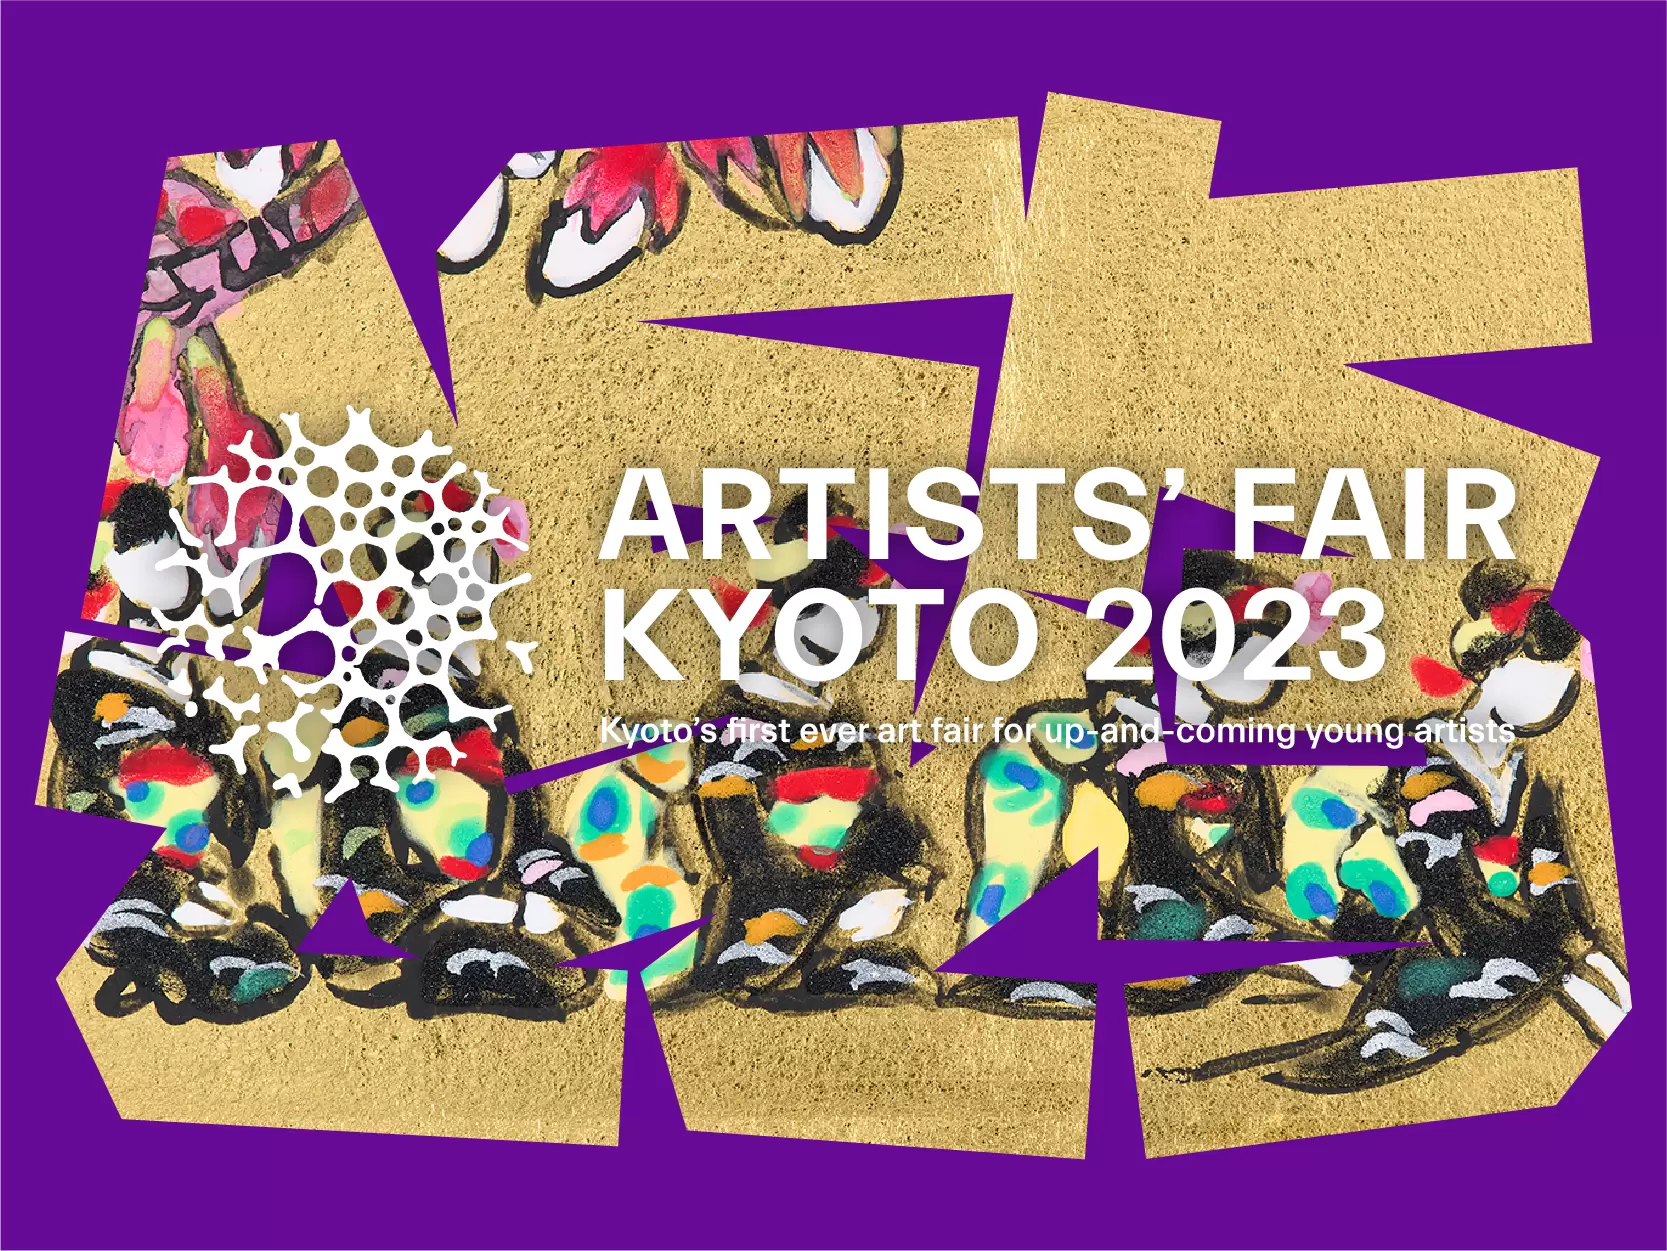 Takashi Ikegami + ALTERNATIVE MACHINE's New Artwork "What you can see is what you can't see" Exhibited at Artists’ Fair Kyoto 2023